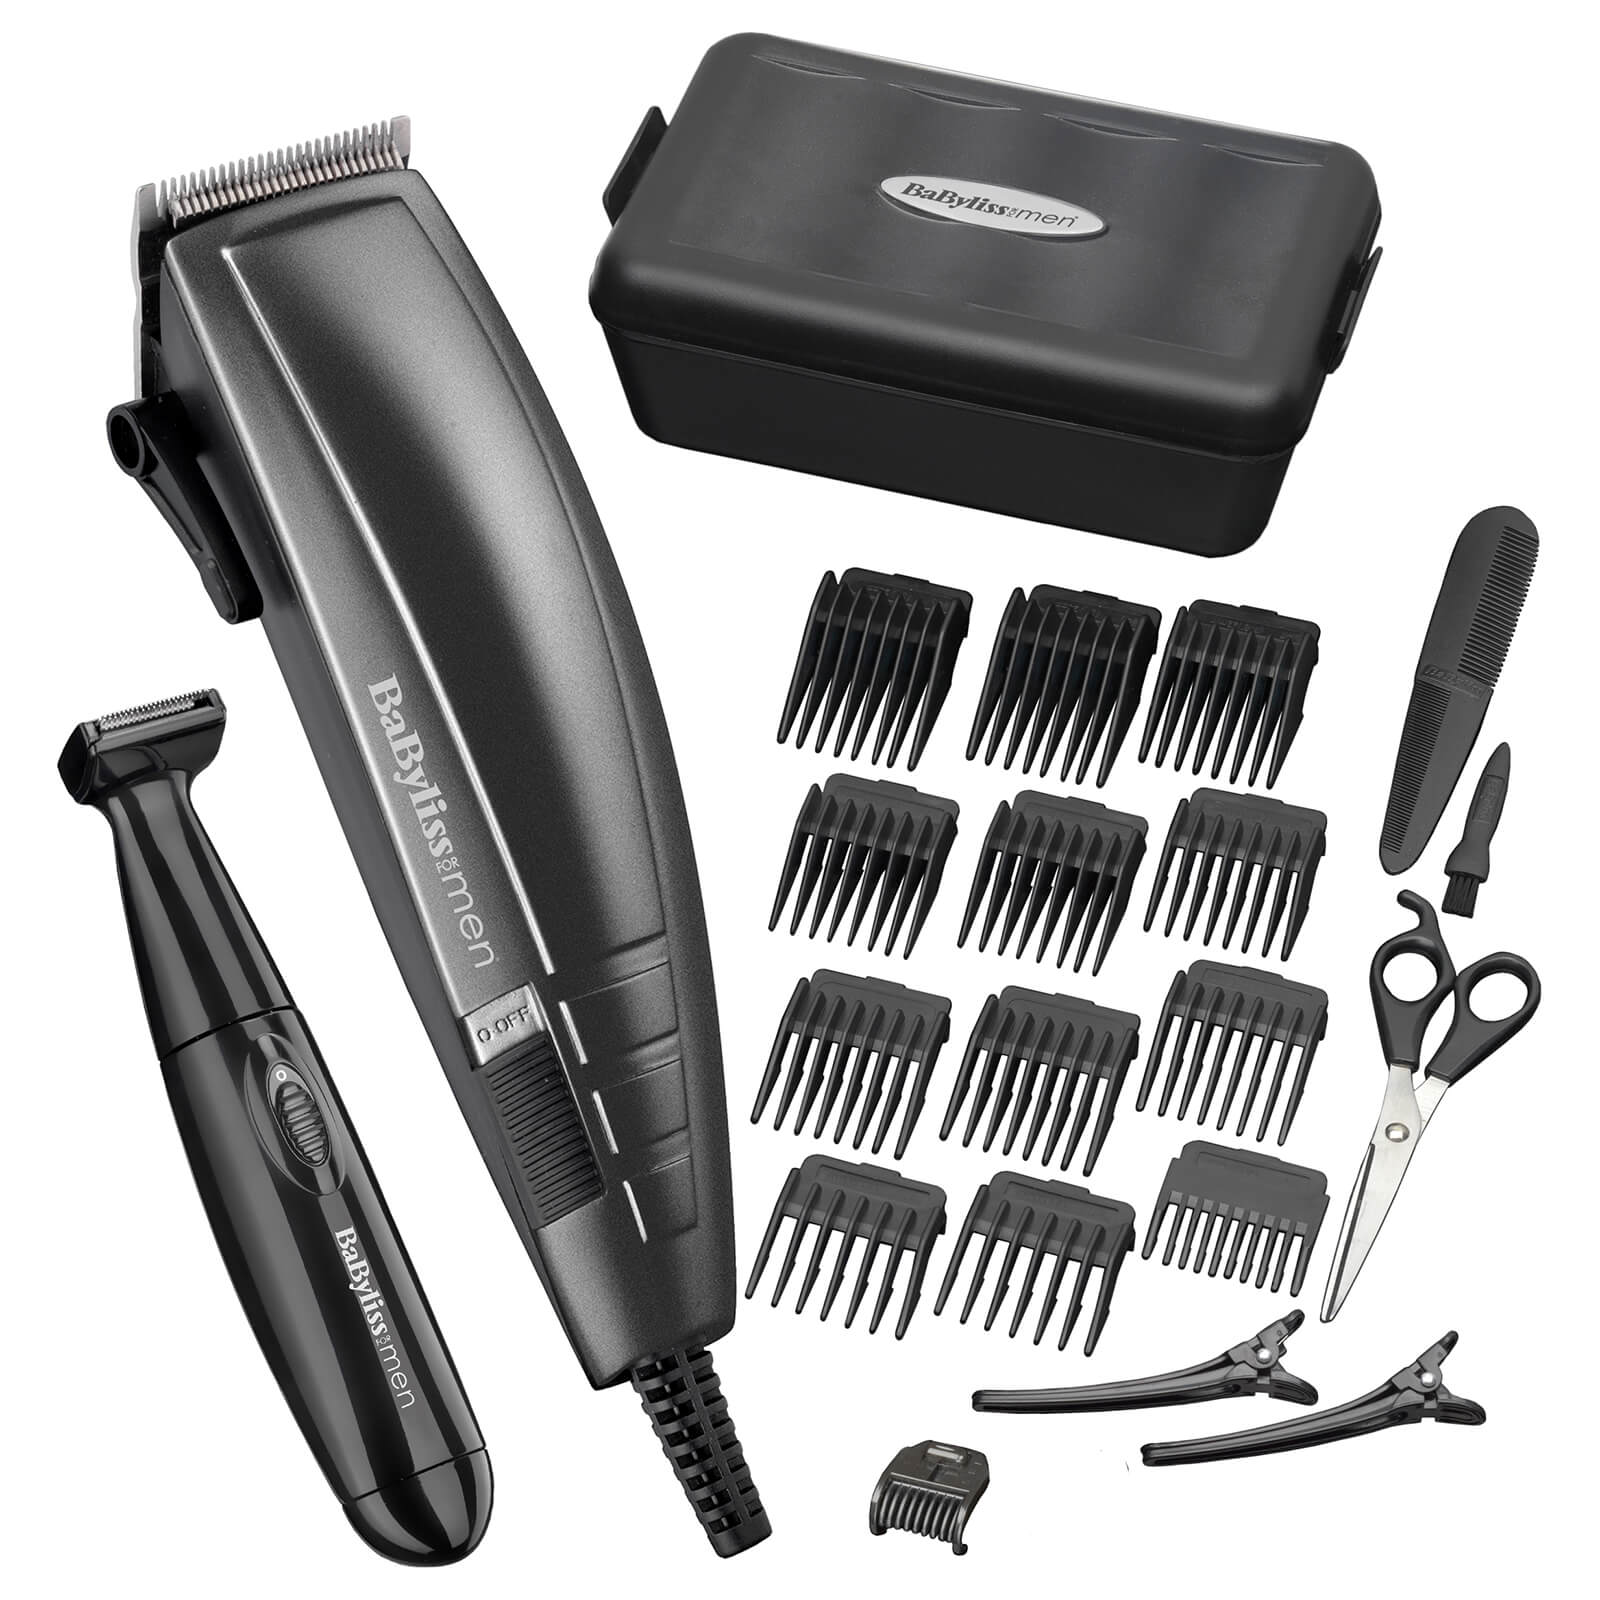 BaByliss For Men 22 Piece Home Hair Cutting Kit lookfantastic.com imagine